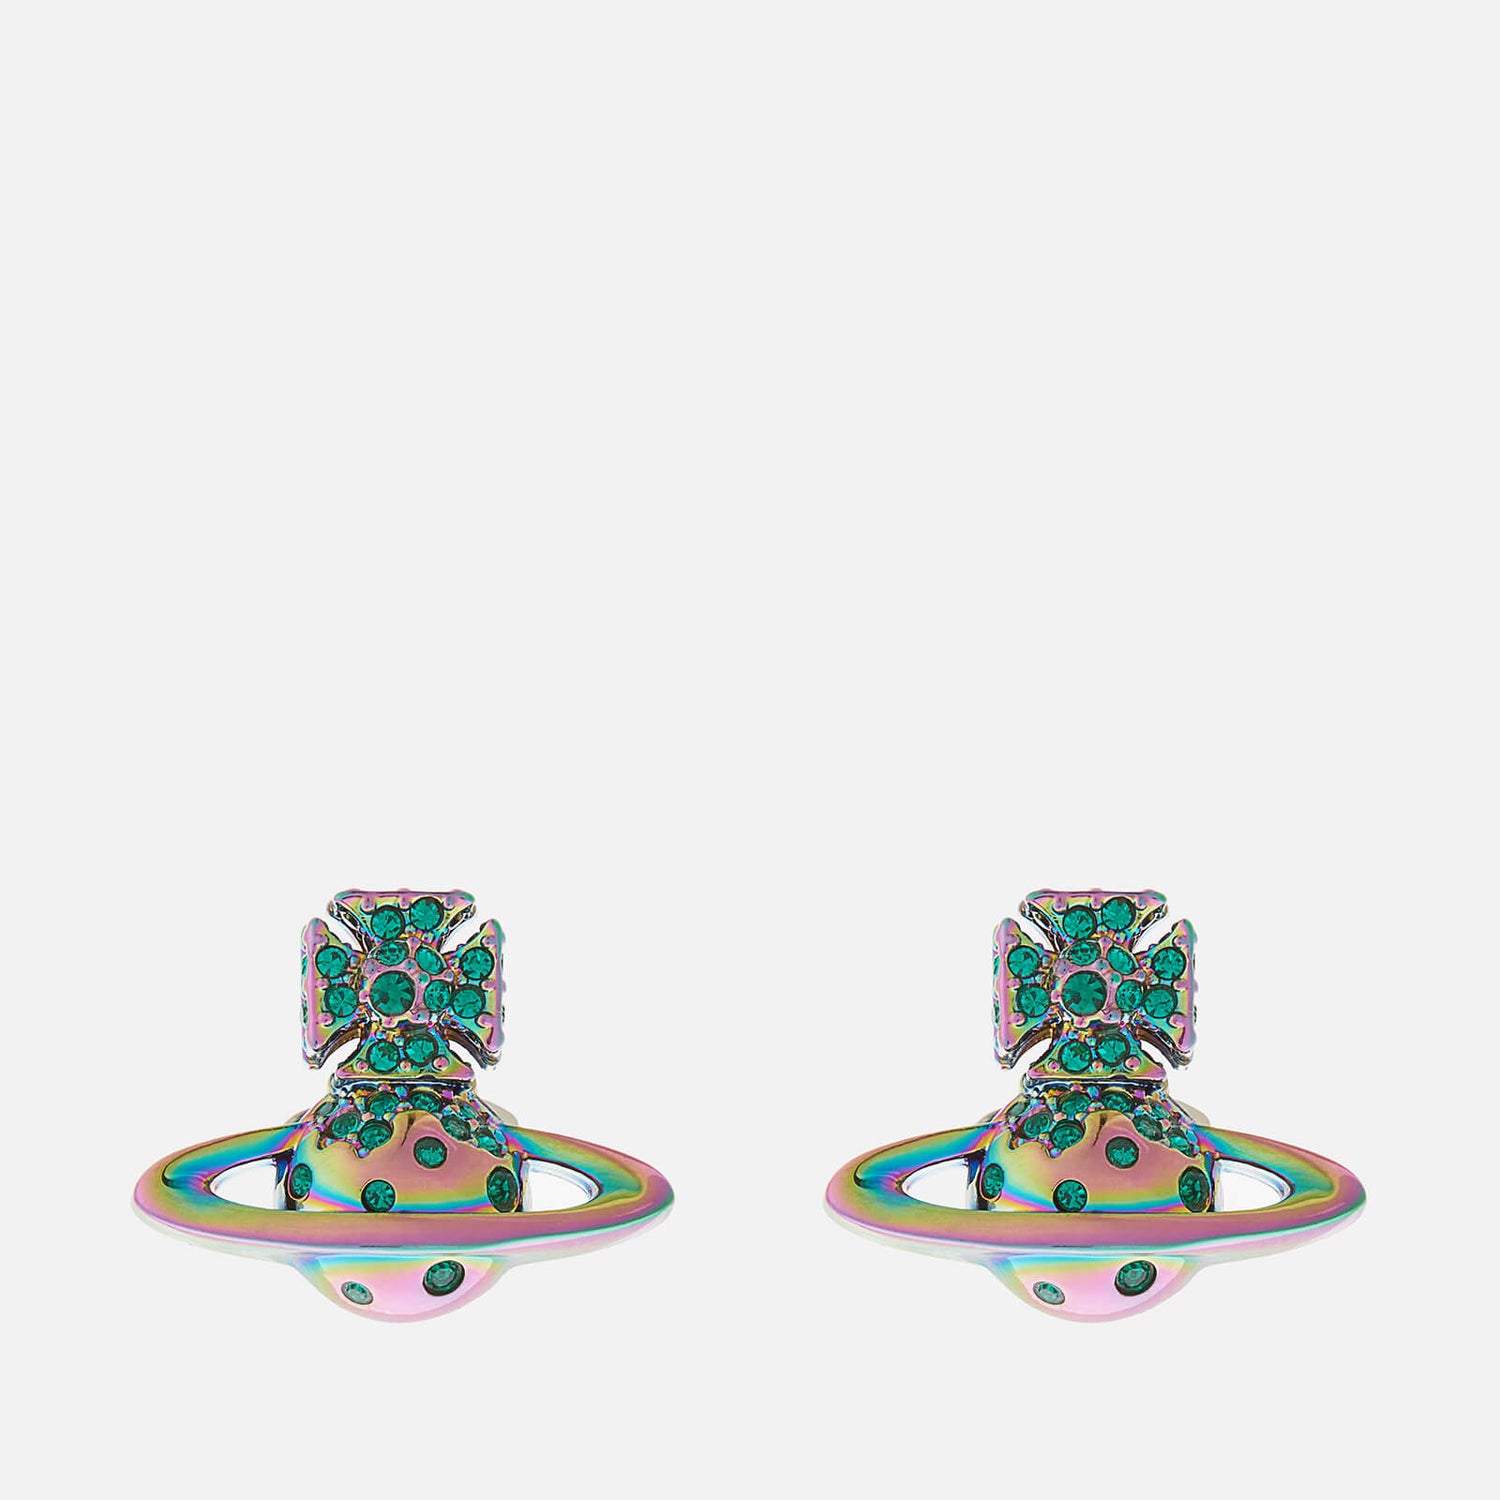 Vivienne Westwood Porfino Bas Relief Iridescent-Tone Brass and Crystal Earrings